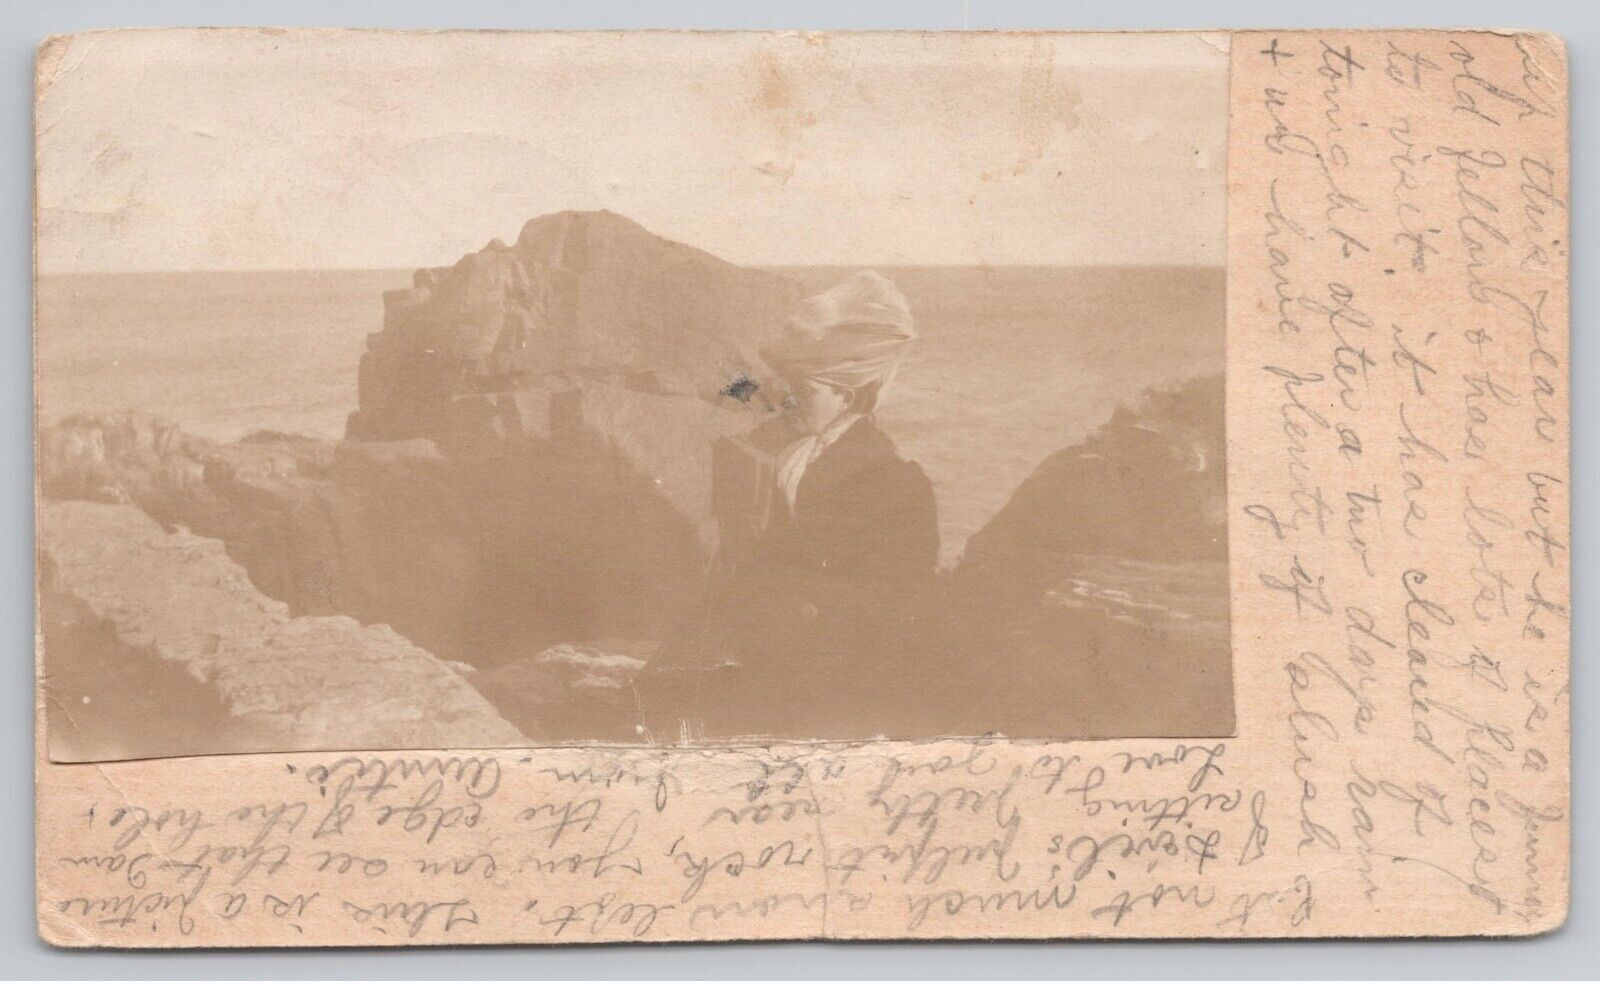 Postcard RPPC Woman in front of Cliffs and Sea, Ogunquit, Maine Vintage PM 1910